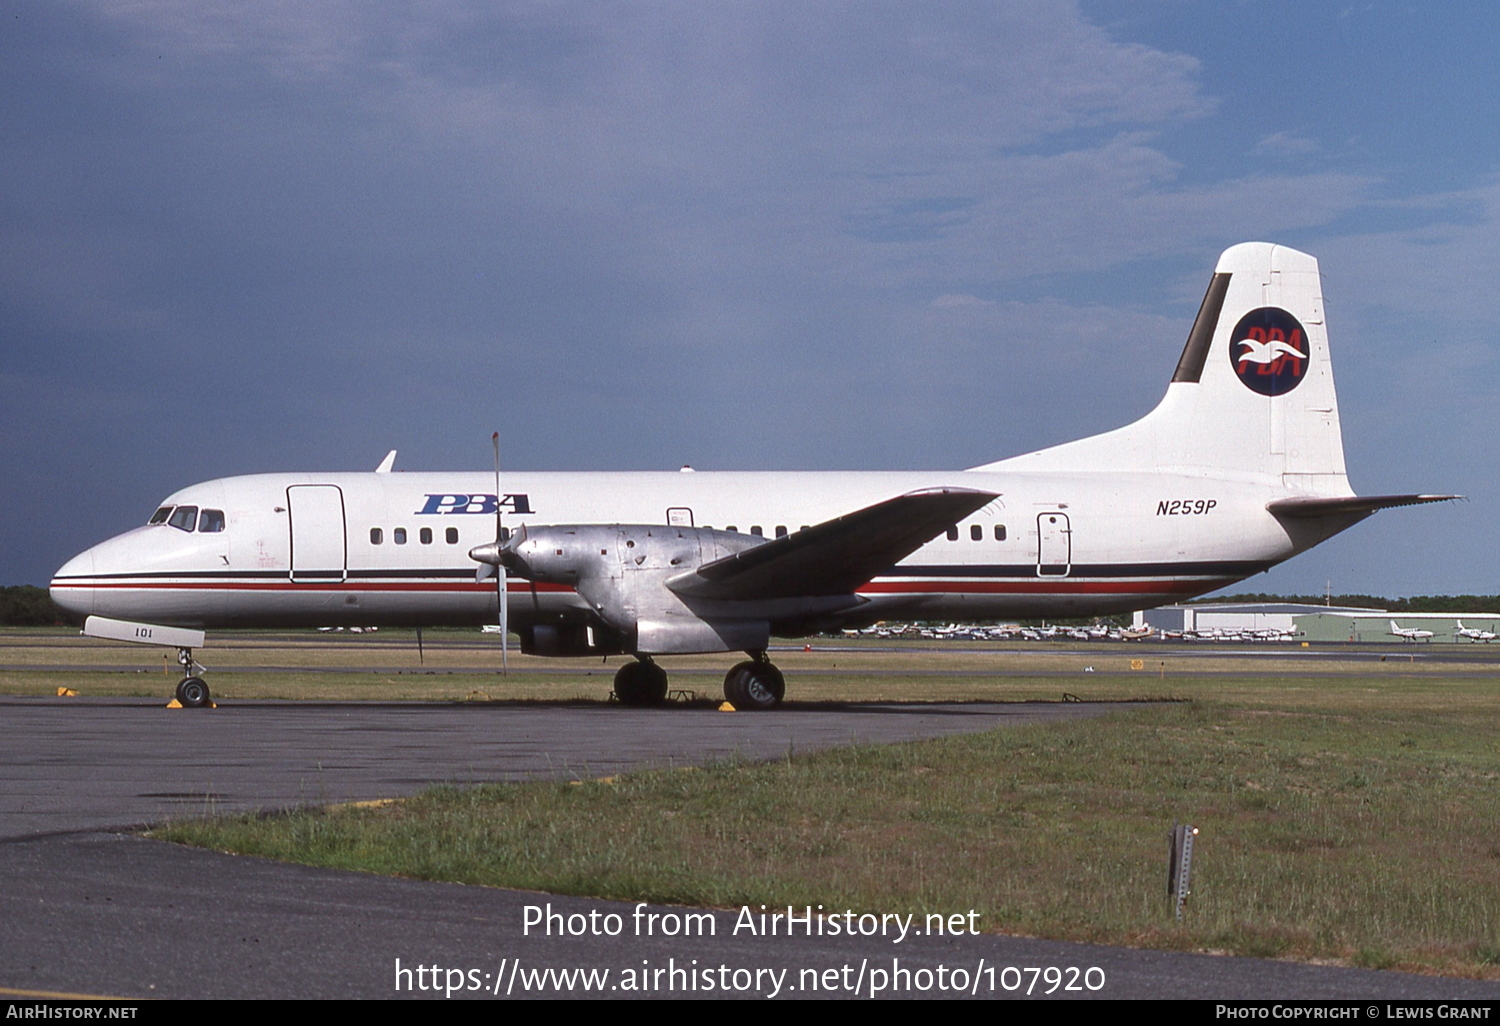 Aircraft Photo Of N259p Namc Ys 11a 5 Pba Provincetown Boston Airline Airhistory Net 1079